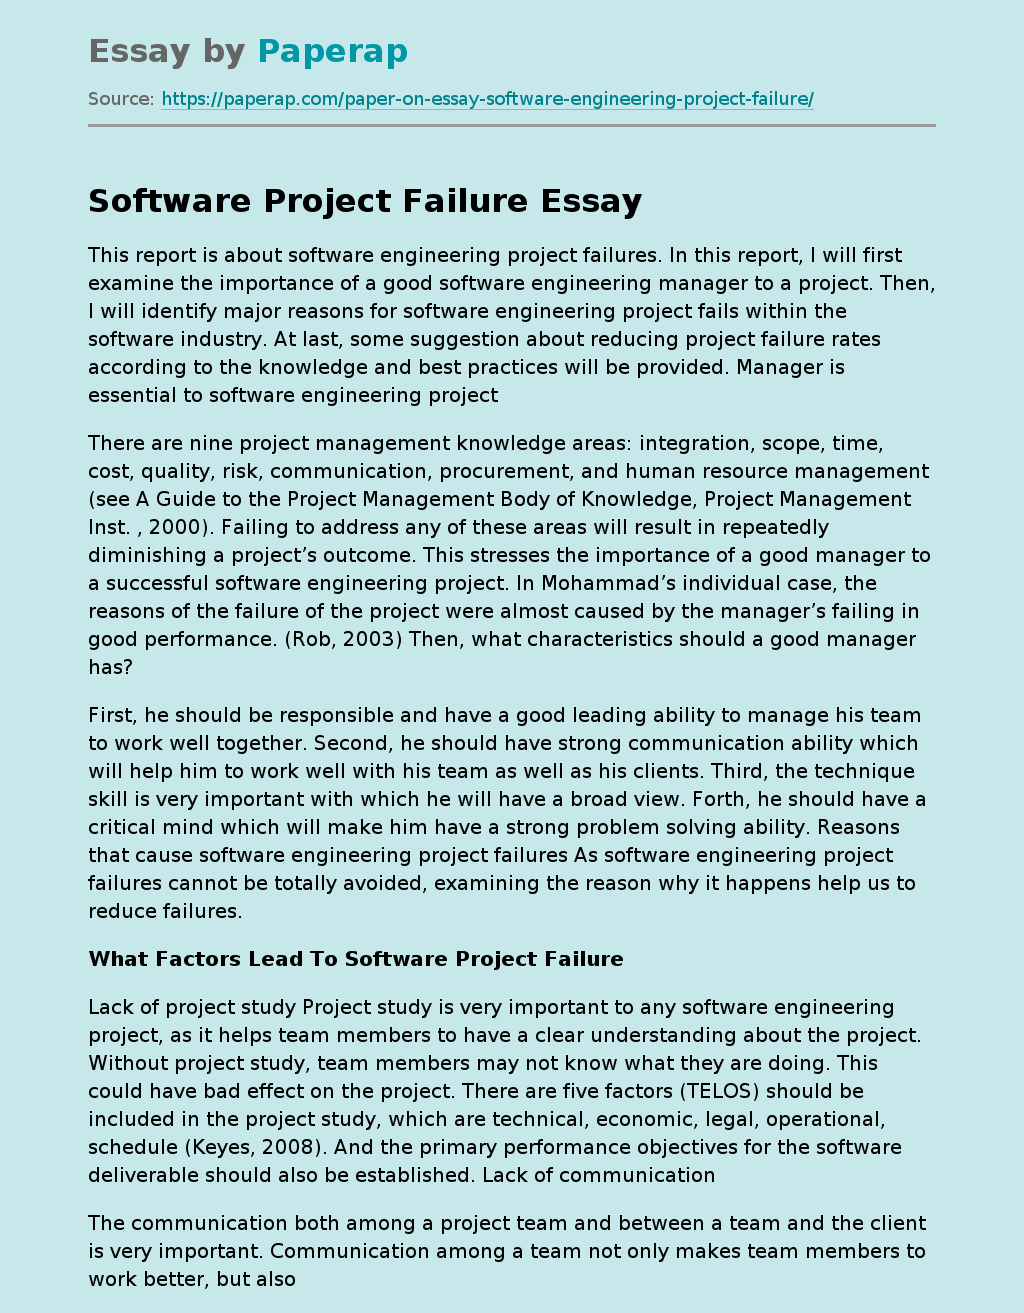 Software Project Failure